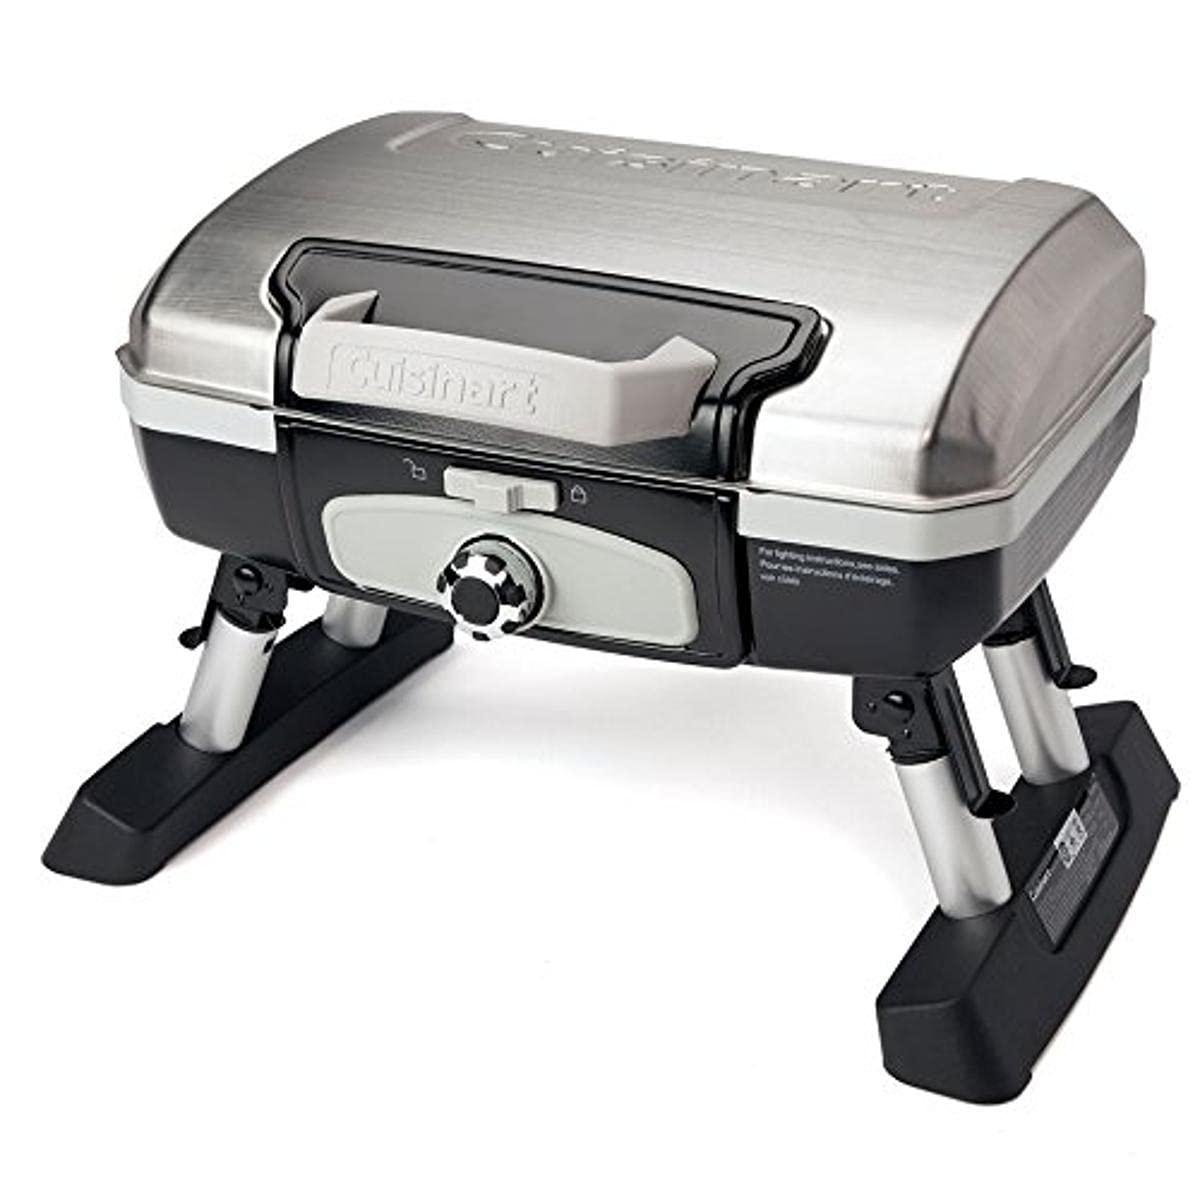 Cuisinart CGG-180TS Petit Gourmet Portable Tabletop Gas Grill, Stainless Steel - CookCave